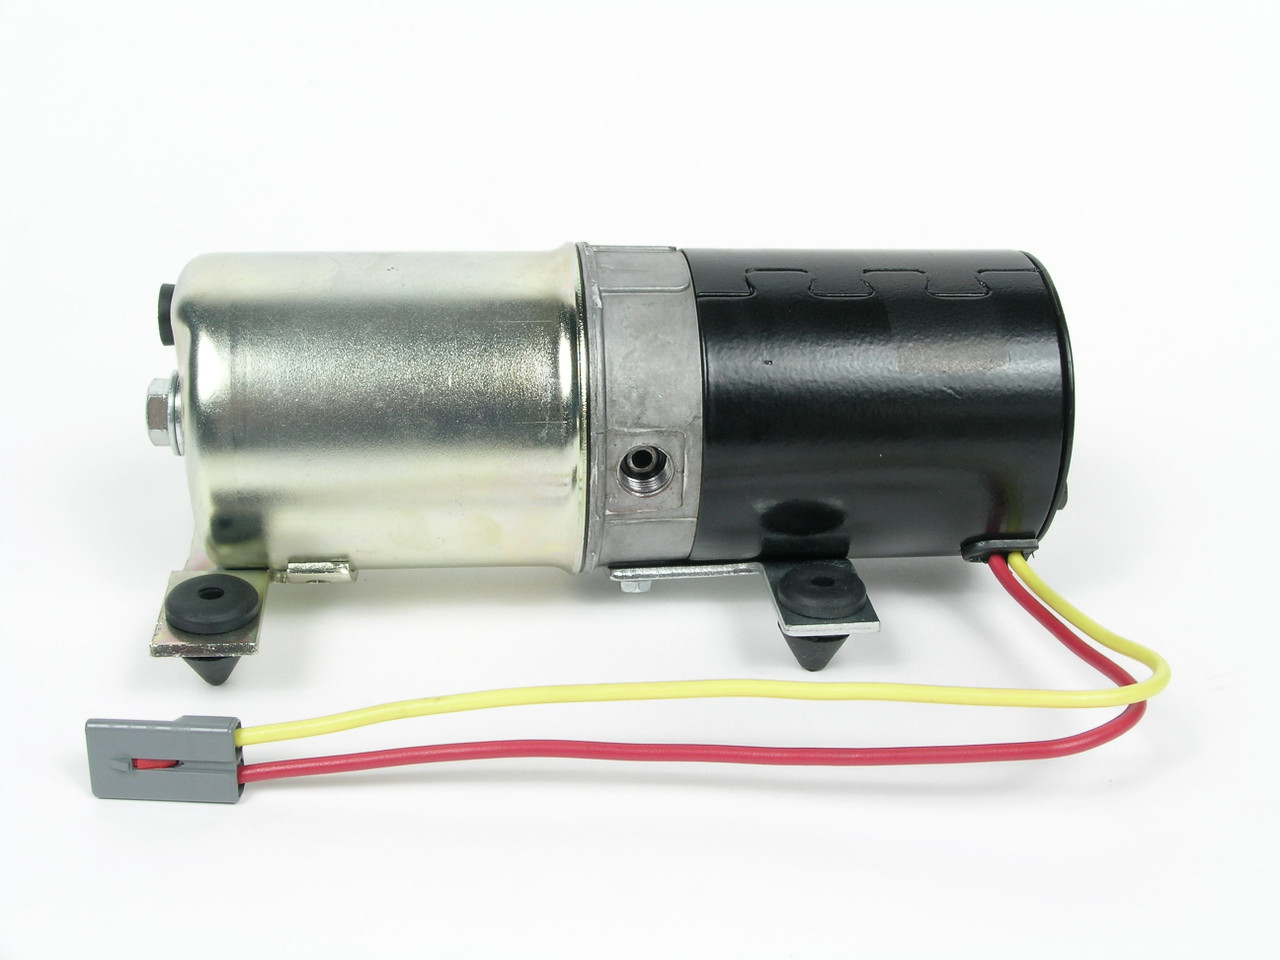 Ford Mustang Pump Motor, 1994-1998, Fits 1994, 1995, 1996, 1997, 1998